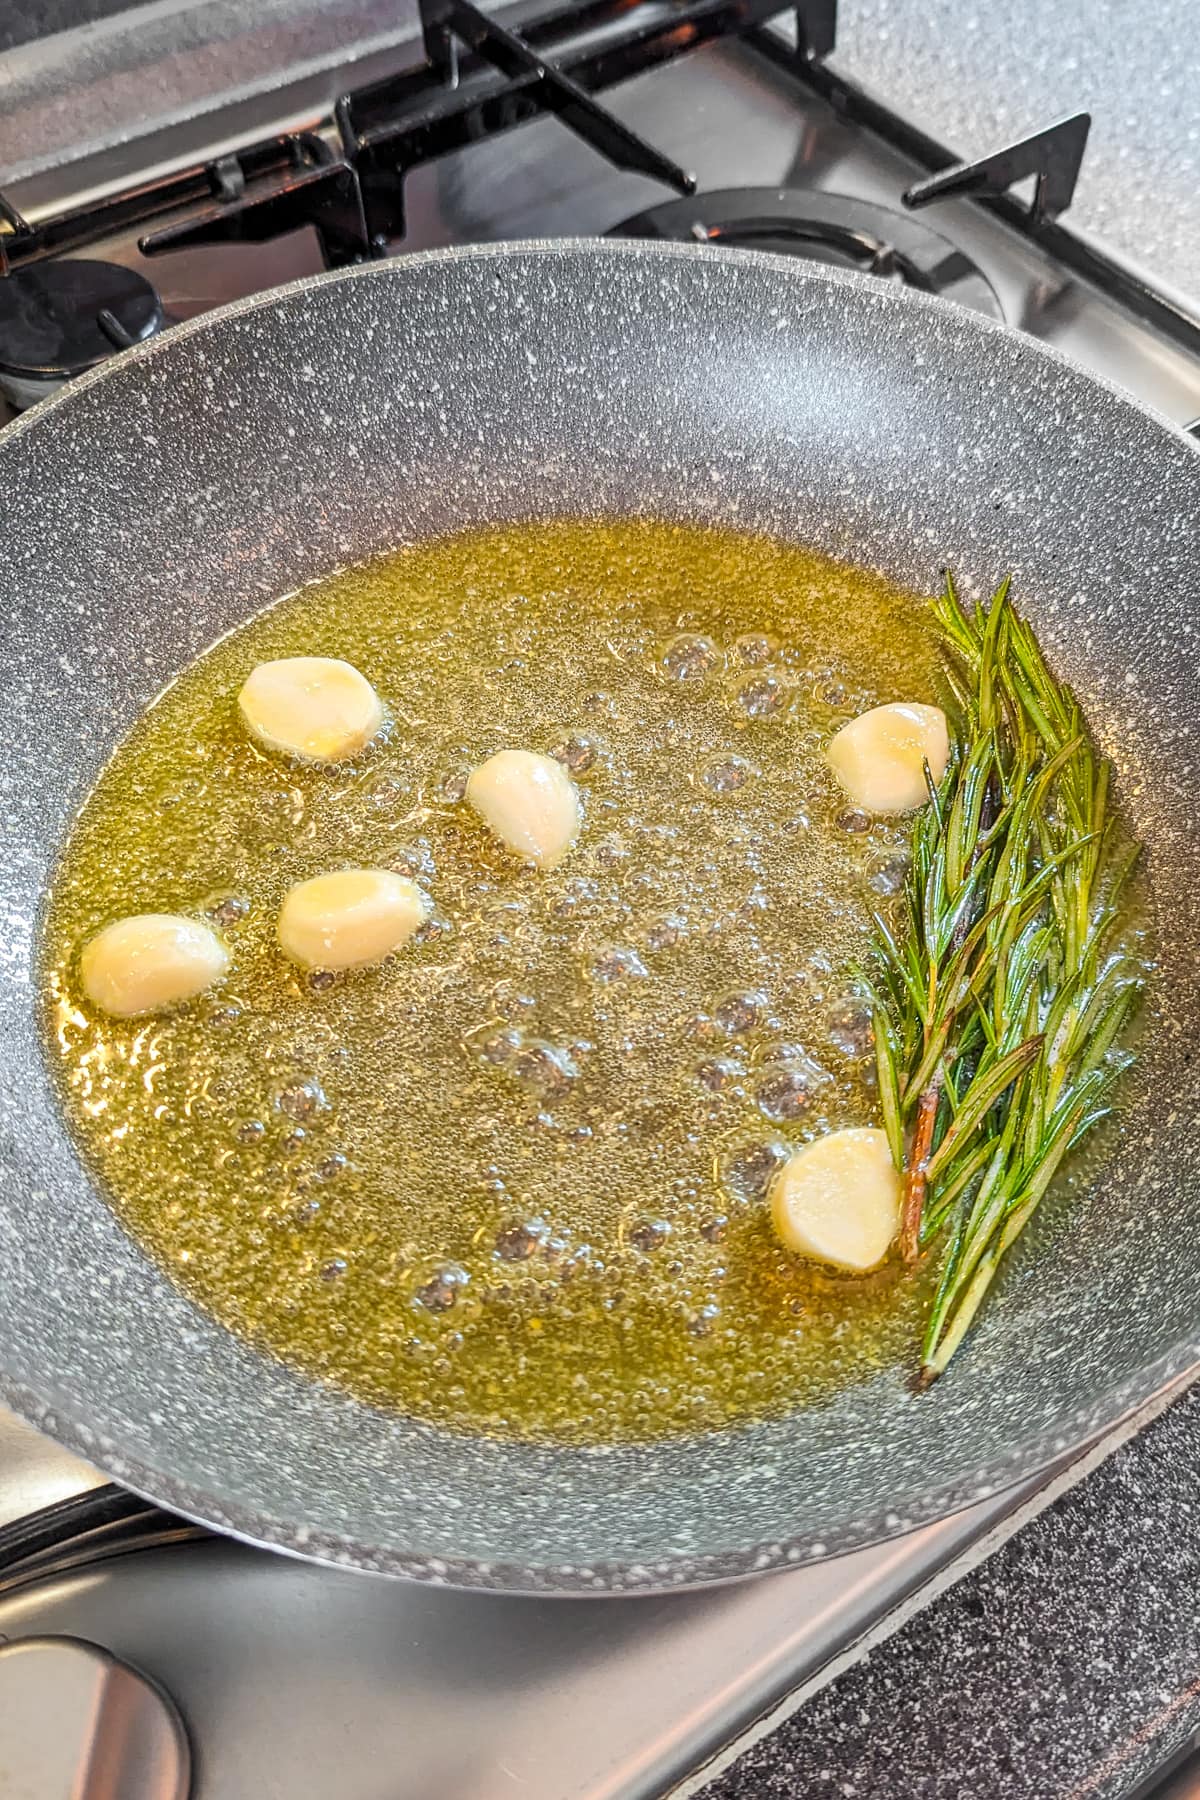 Pan with melted butter flavored with garlic cloves and rosemary.